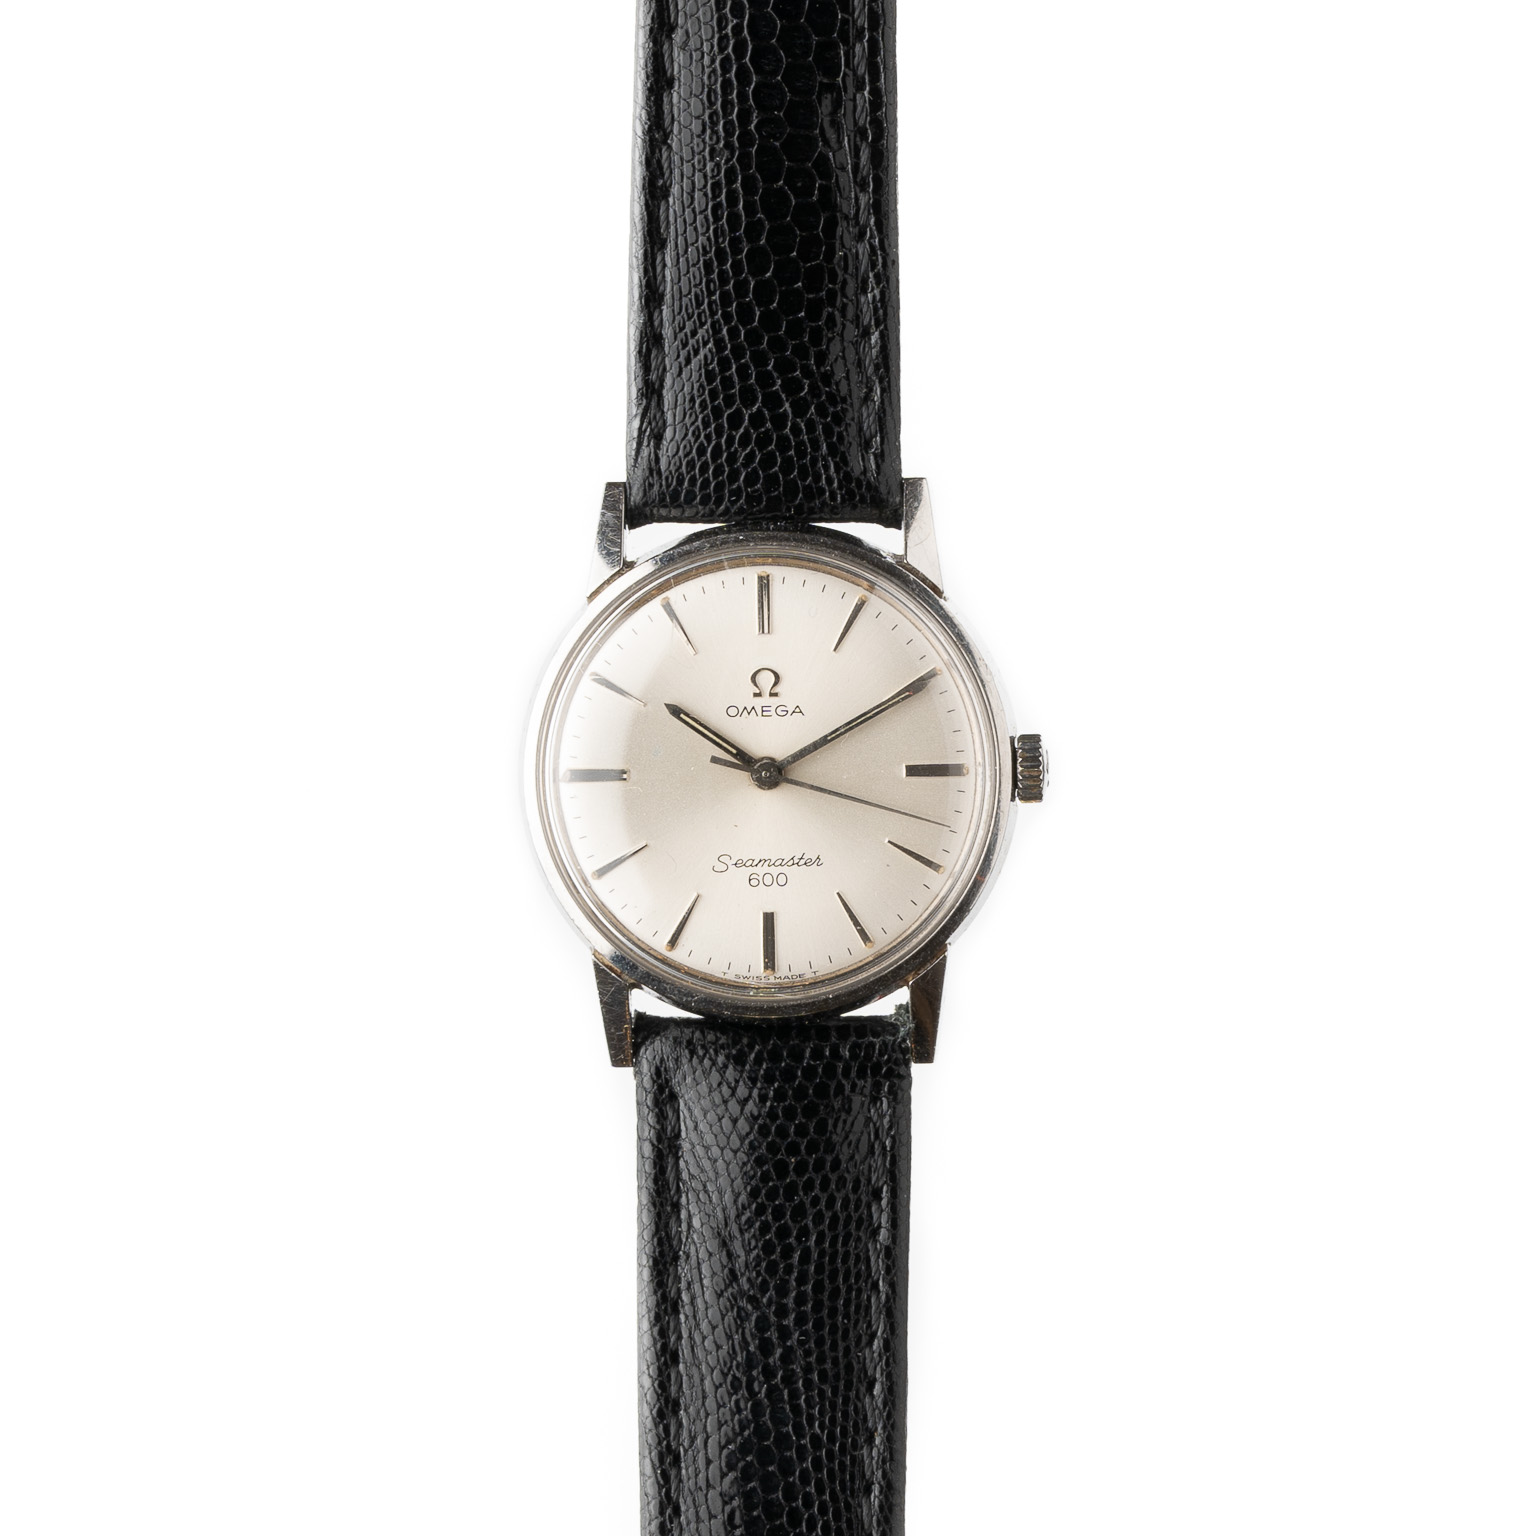 Omega Seamaster 600 135.012 from 1964 watch